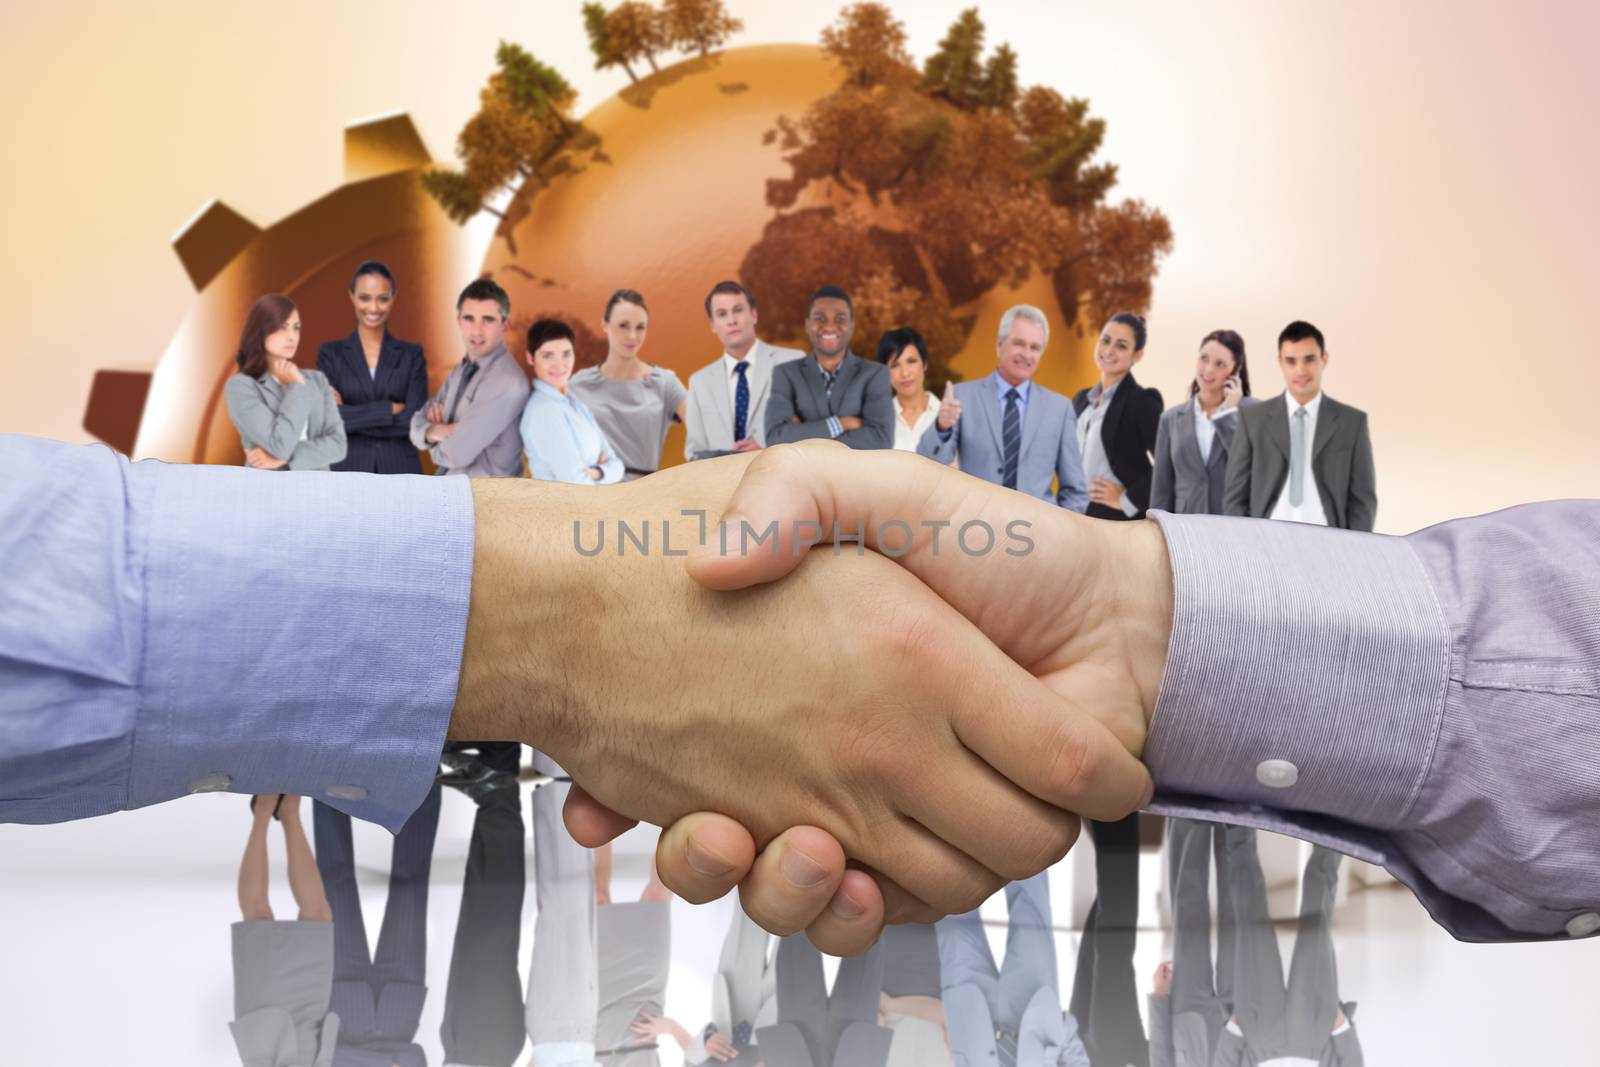 Composite image of hand shake in front of wires by Wavebreakmedia